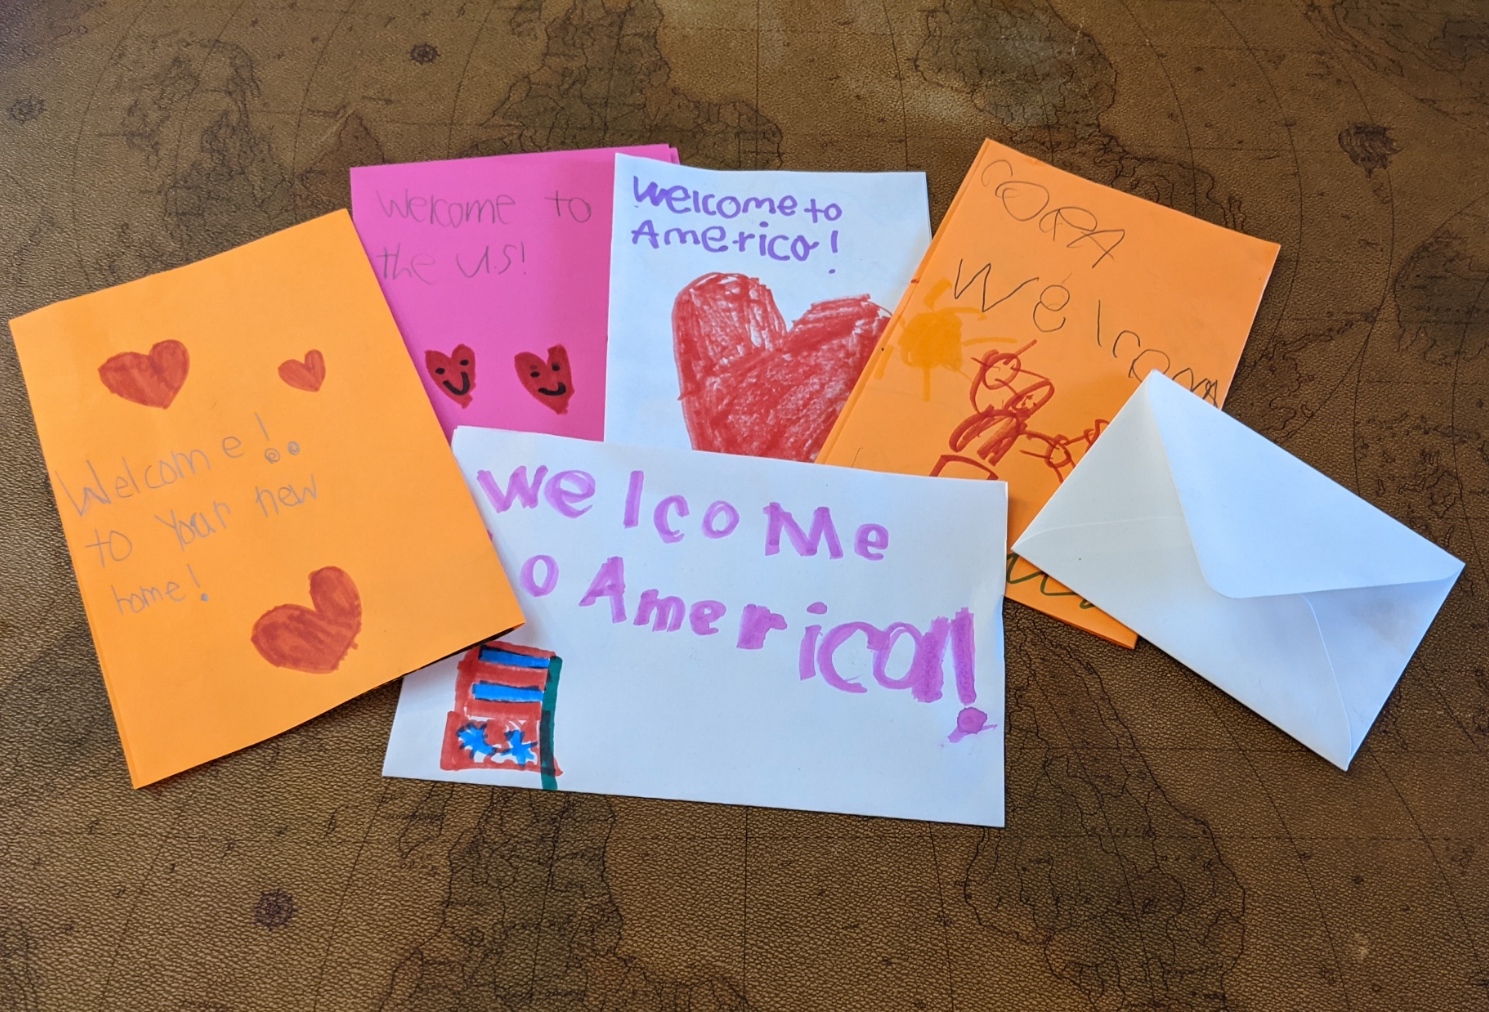 Welcome cards made by Afghan refugees